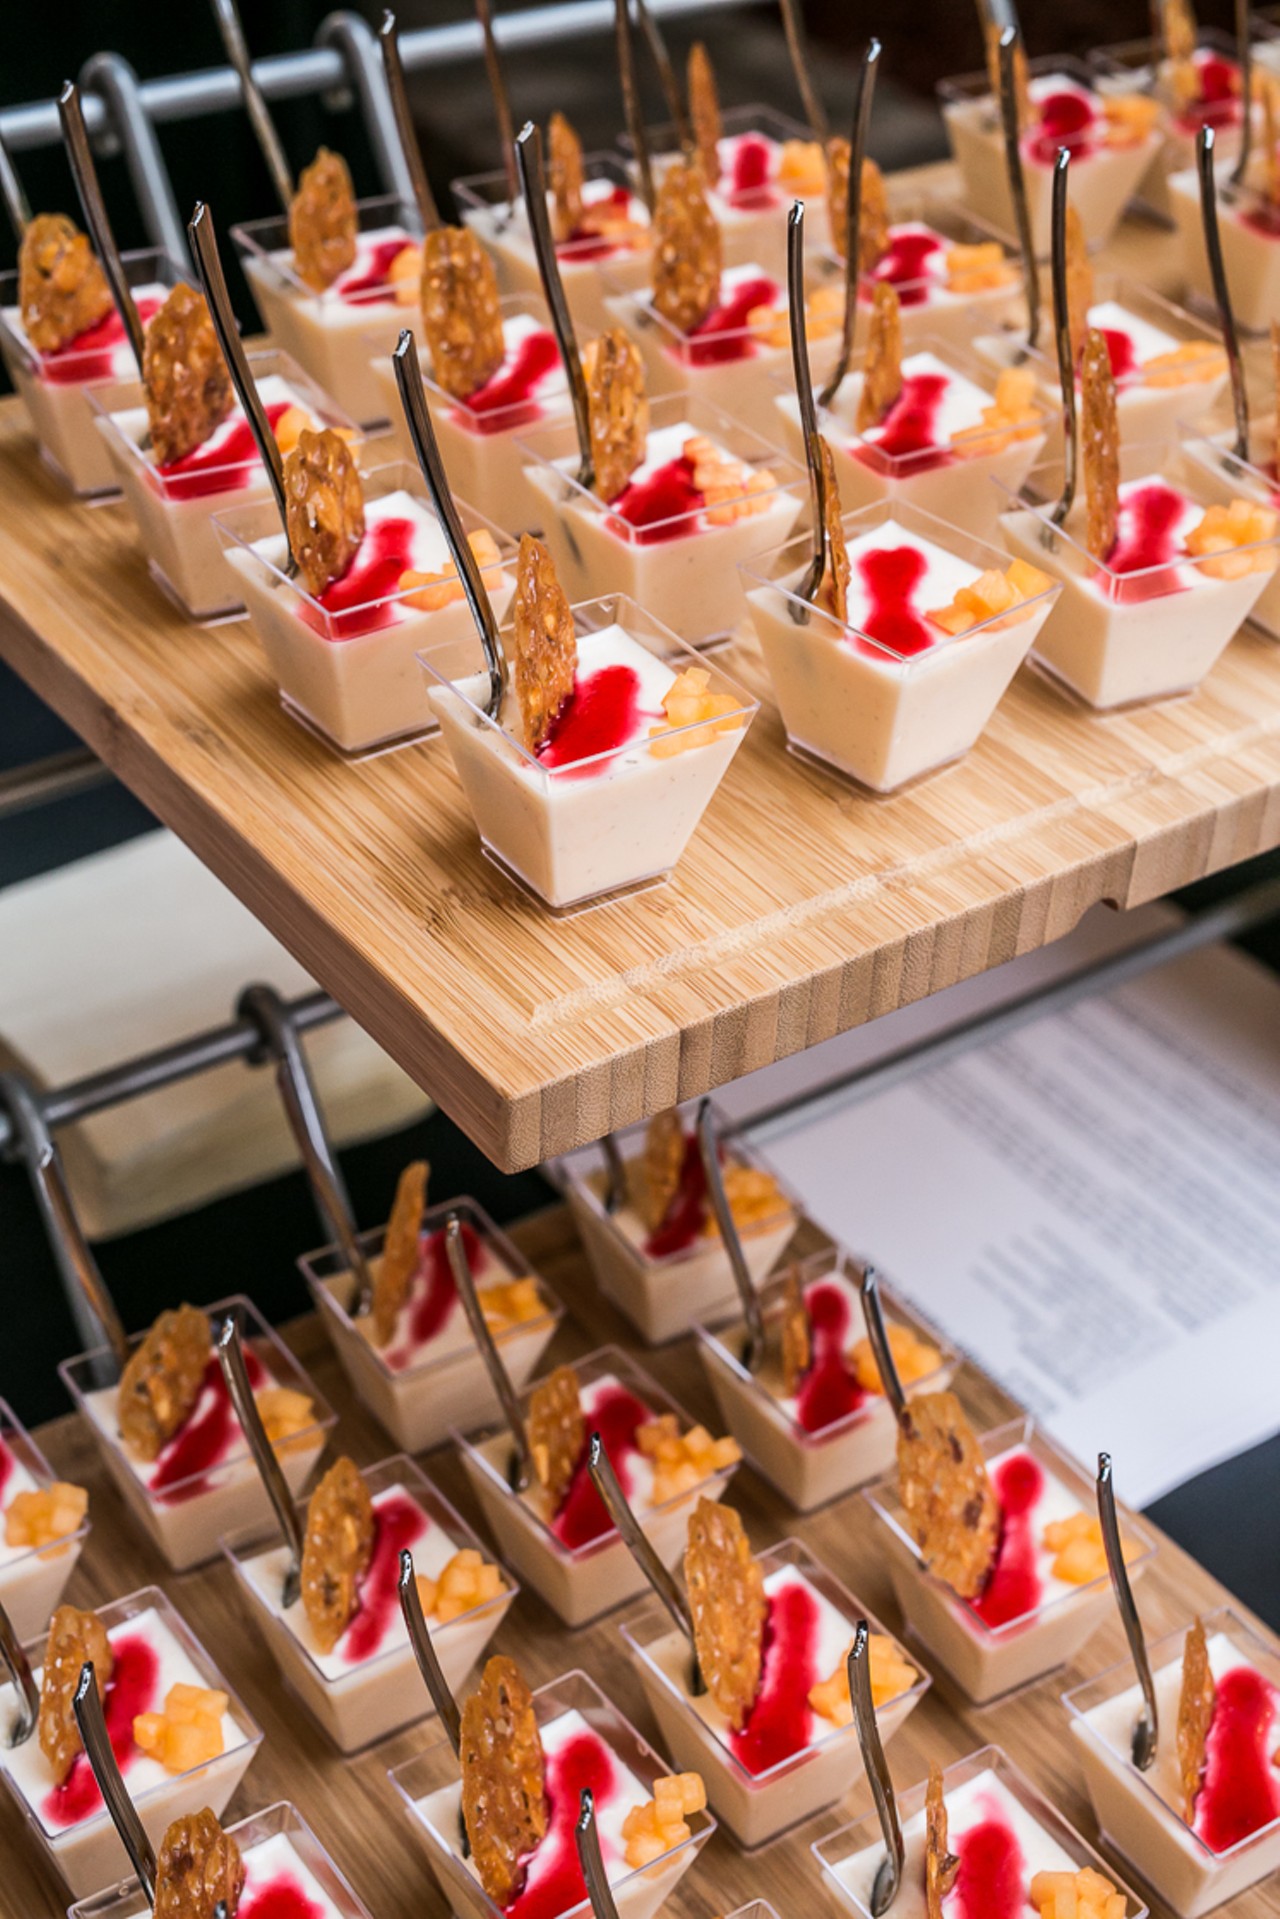 Delicious drink and food photos from Bite Night 2015